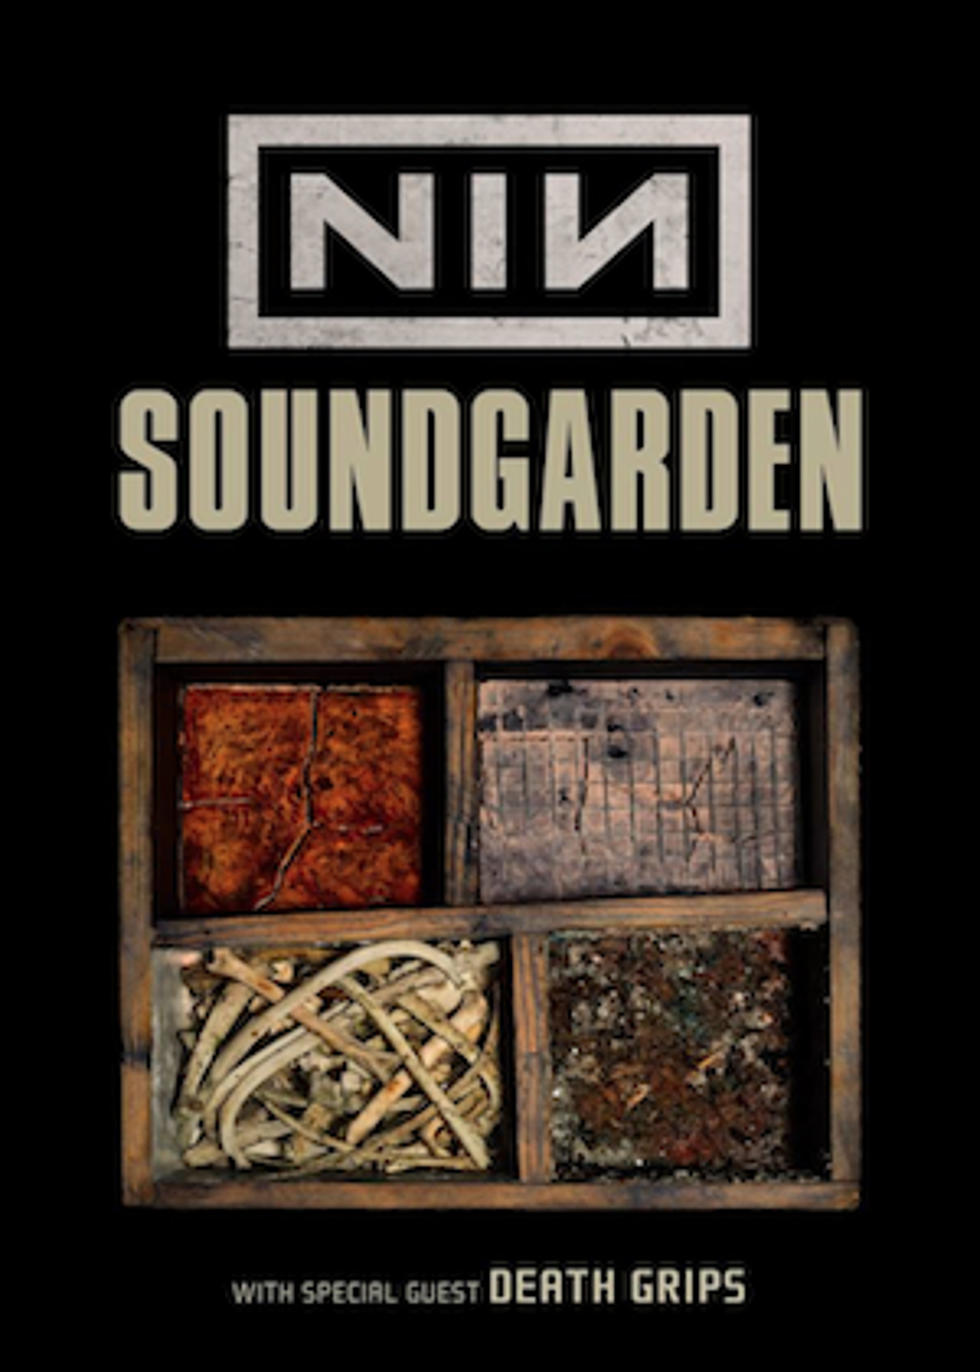 Nine Inch Nails and Soundgarden Slate Summer Tour, with July 24 Stop at DTE Energy Music Theatre